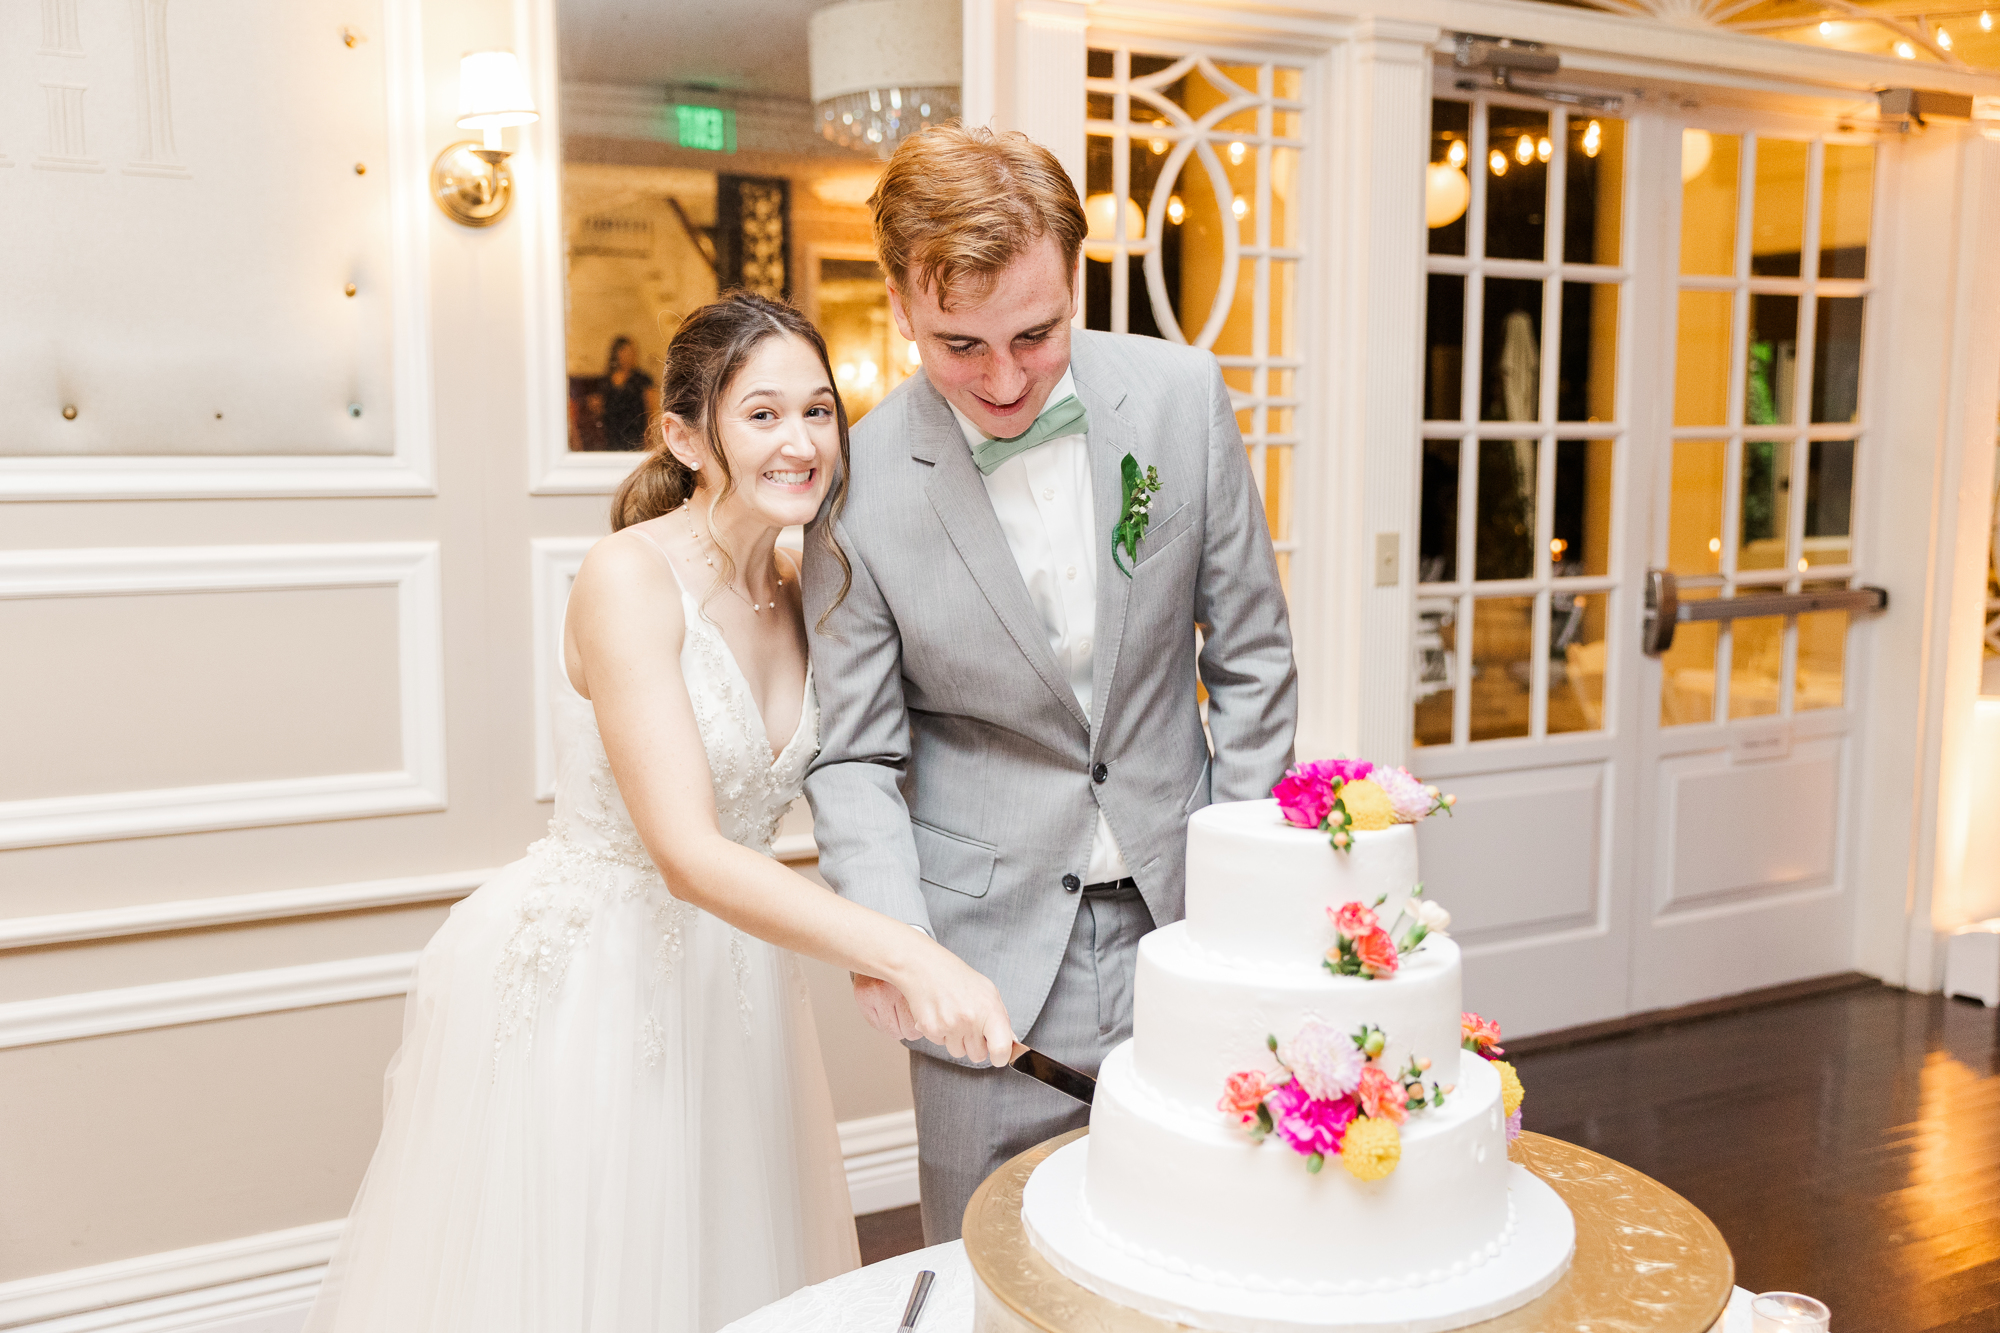 Romantic Wedding at Briarcliff Manor in Summertime